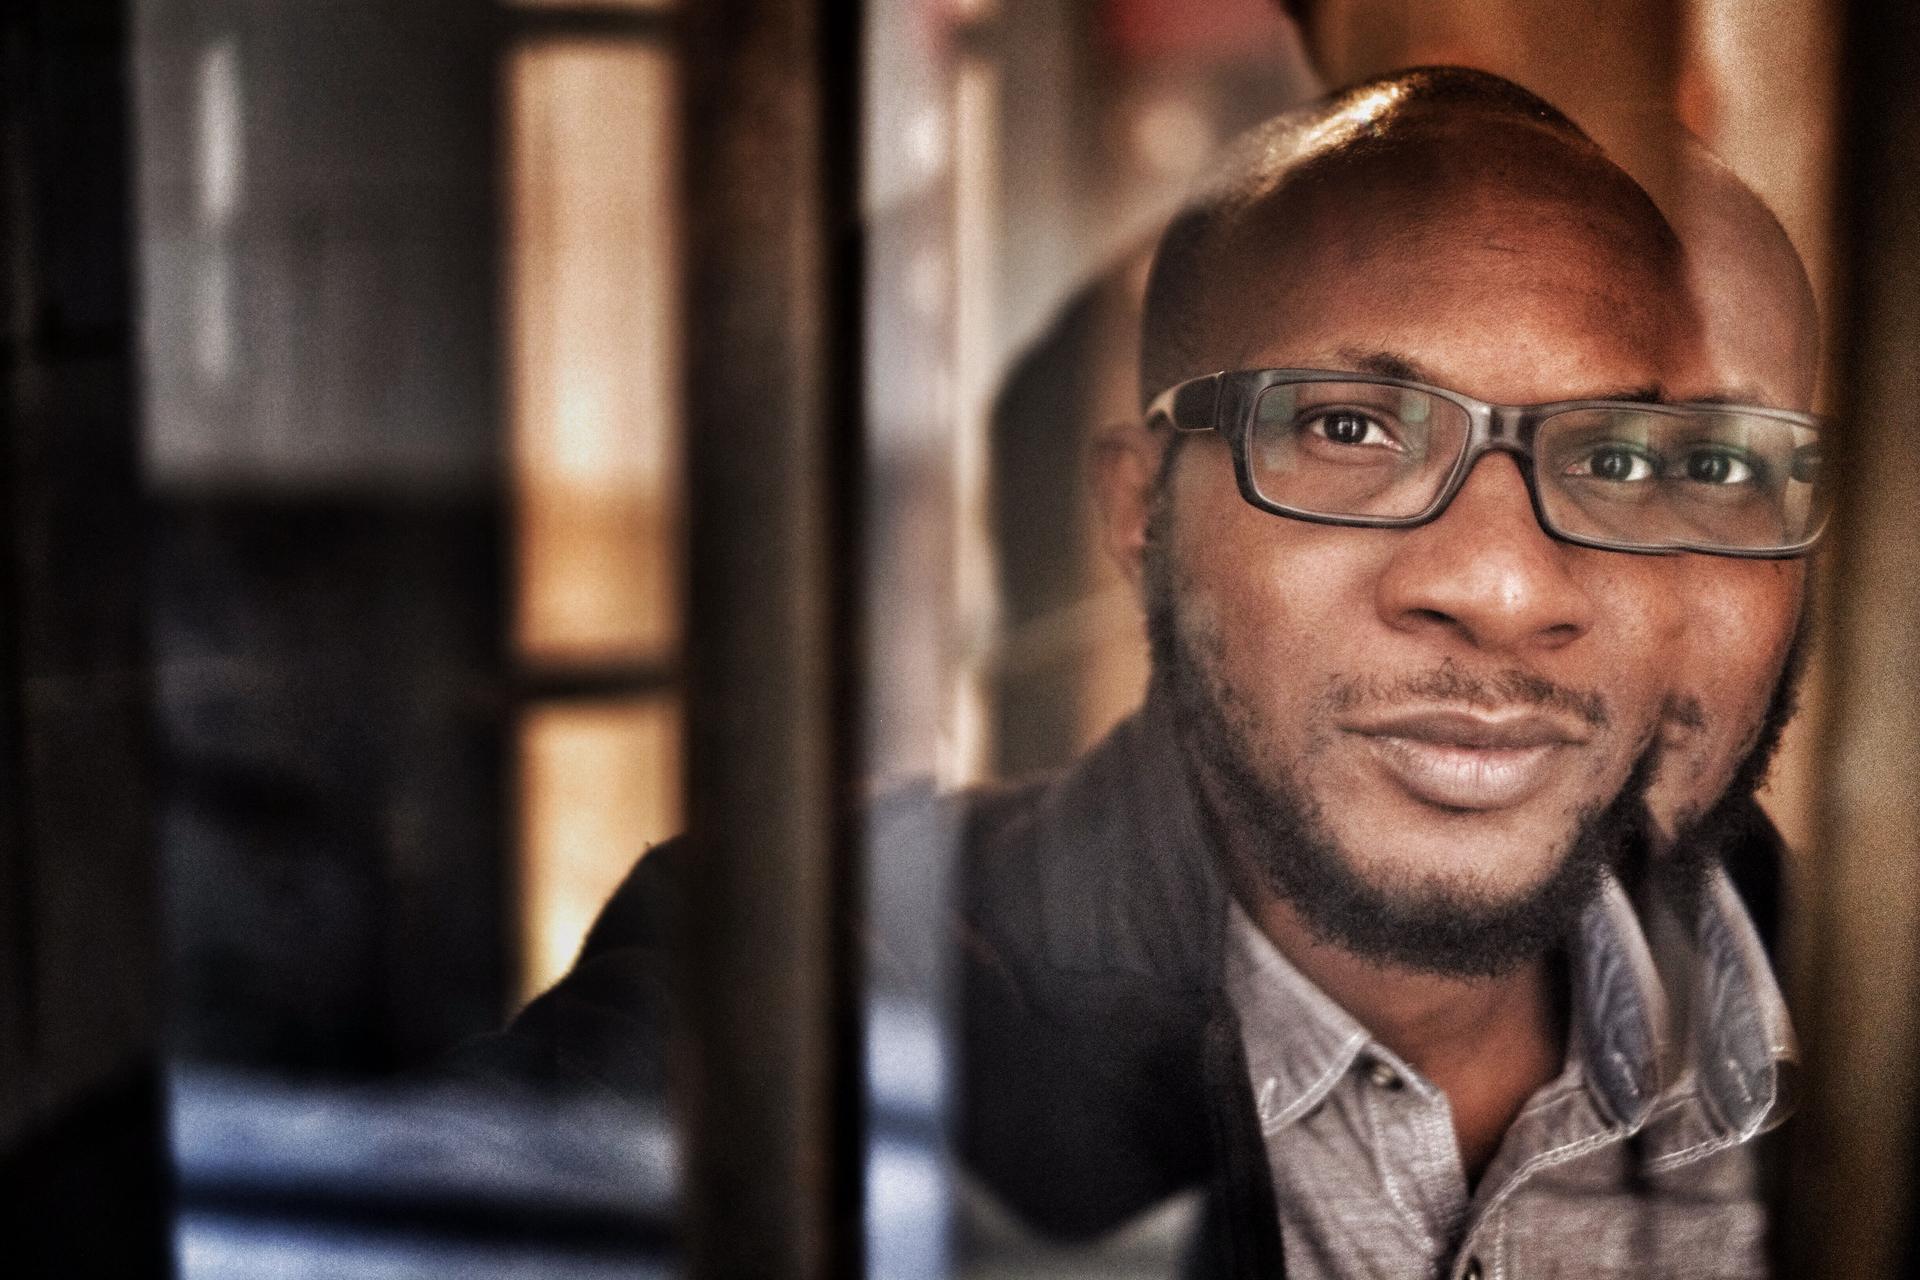 Teju Cole was born in the United States and raised in Nigeria. 